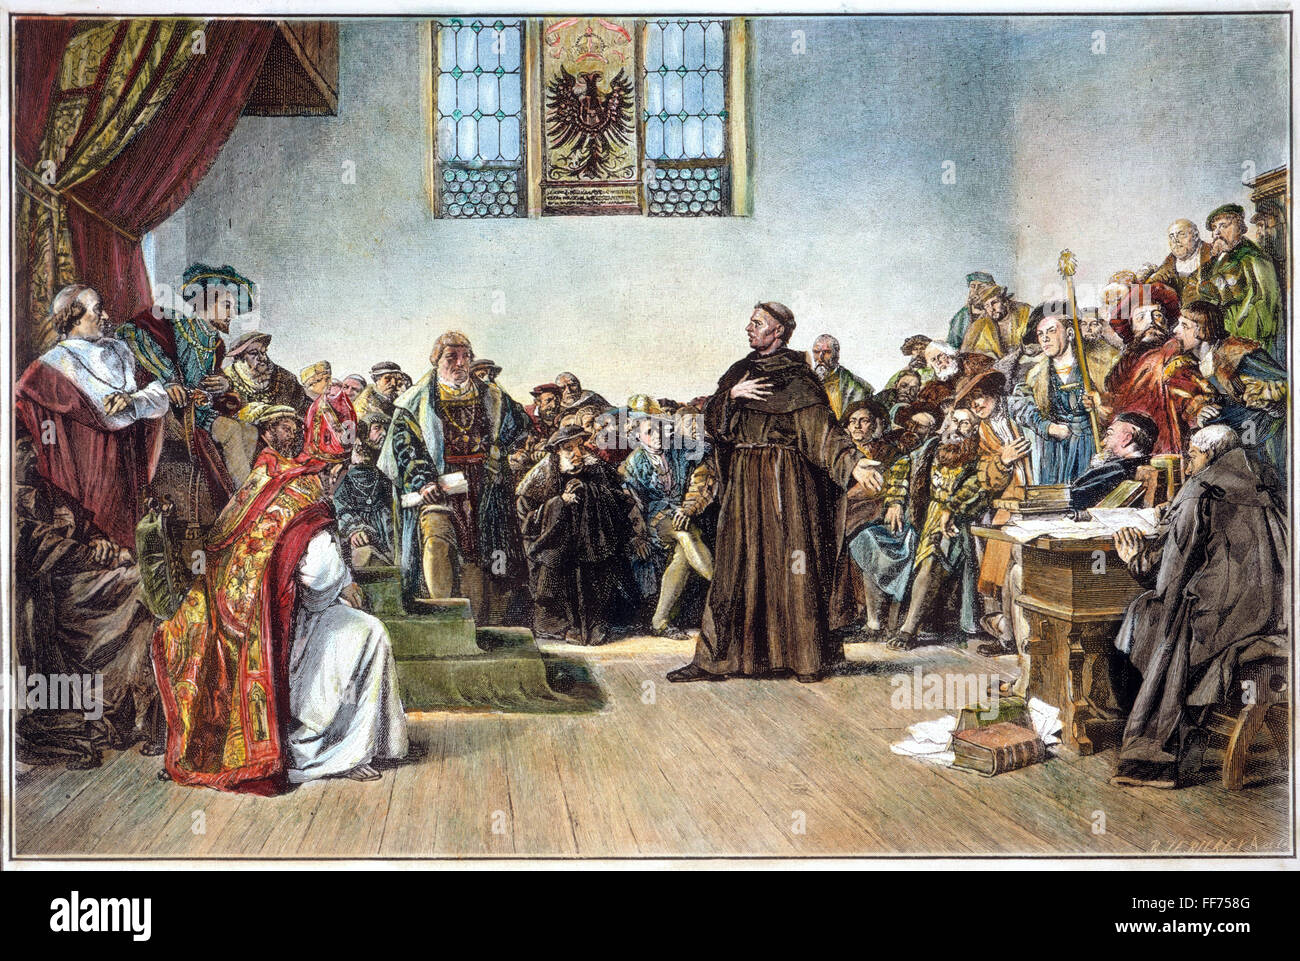 MARTIN LUTHER (1483-1546). /nGerman religious reformer. Luther defends himself before Holy Roman Emperor Charles V at the Diet in Worms, 17-18 April 1521. Line engraving, 19th century. Stock Photo